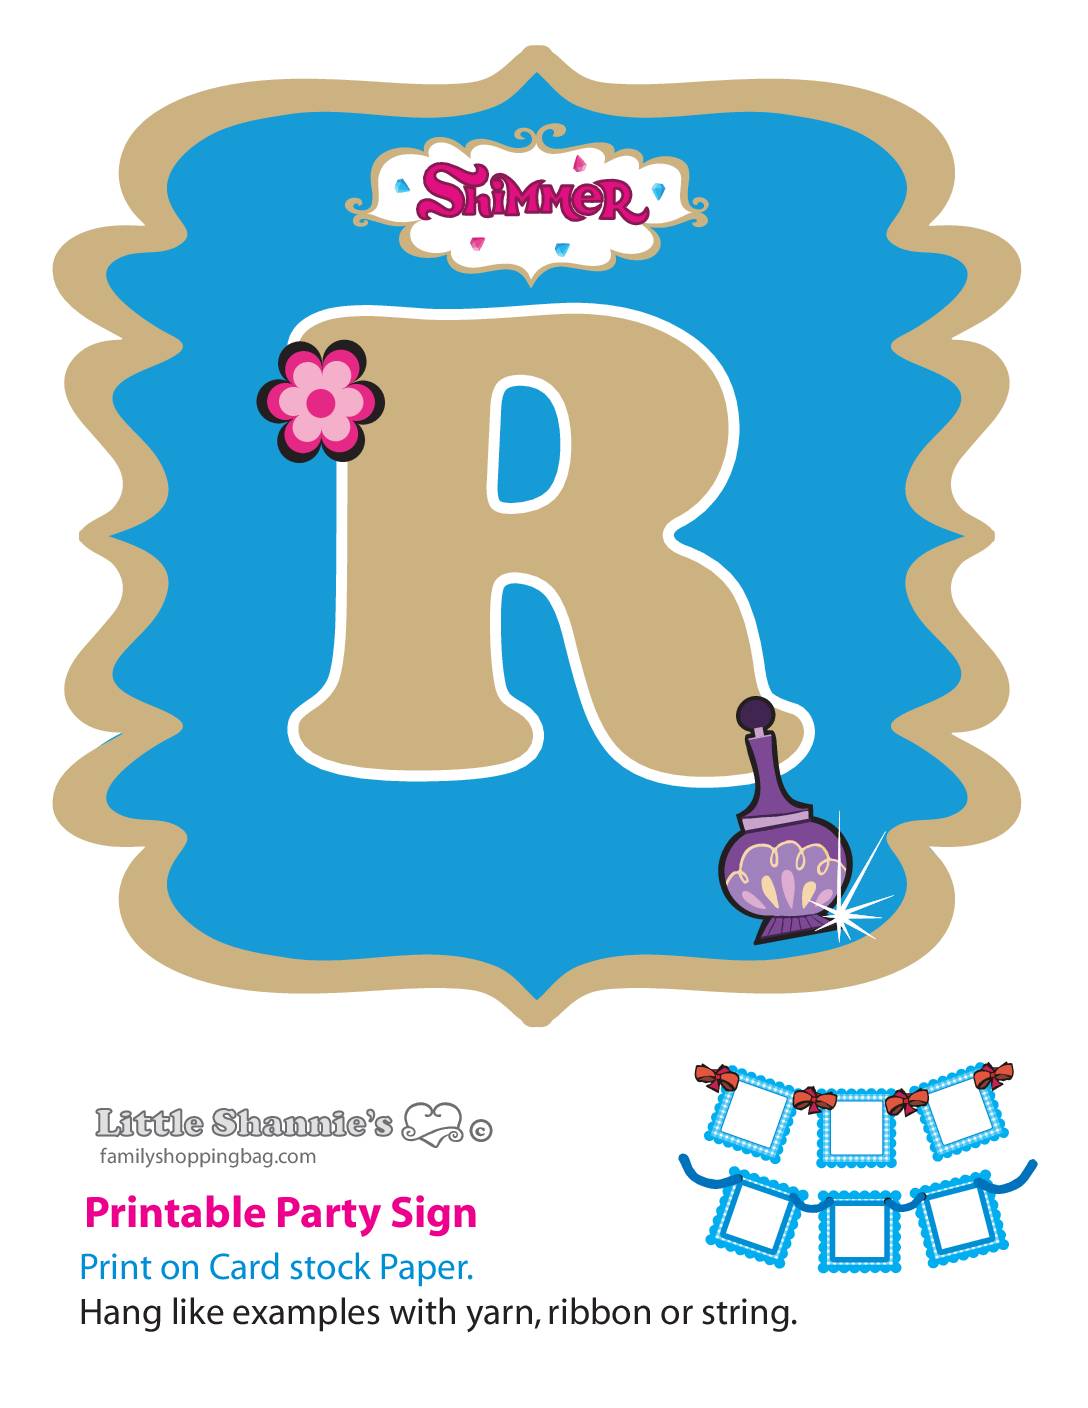 Banner R Shimmer Party Banners